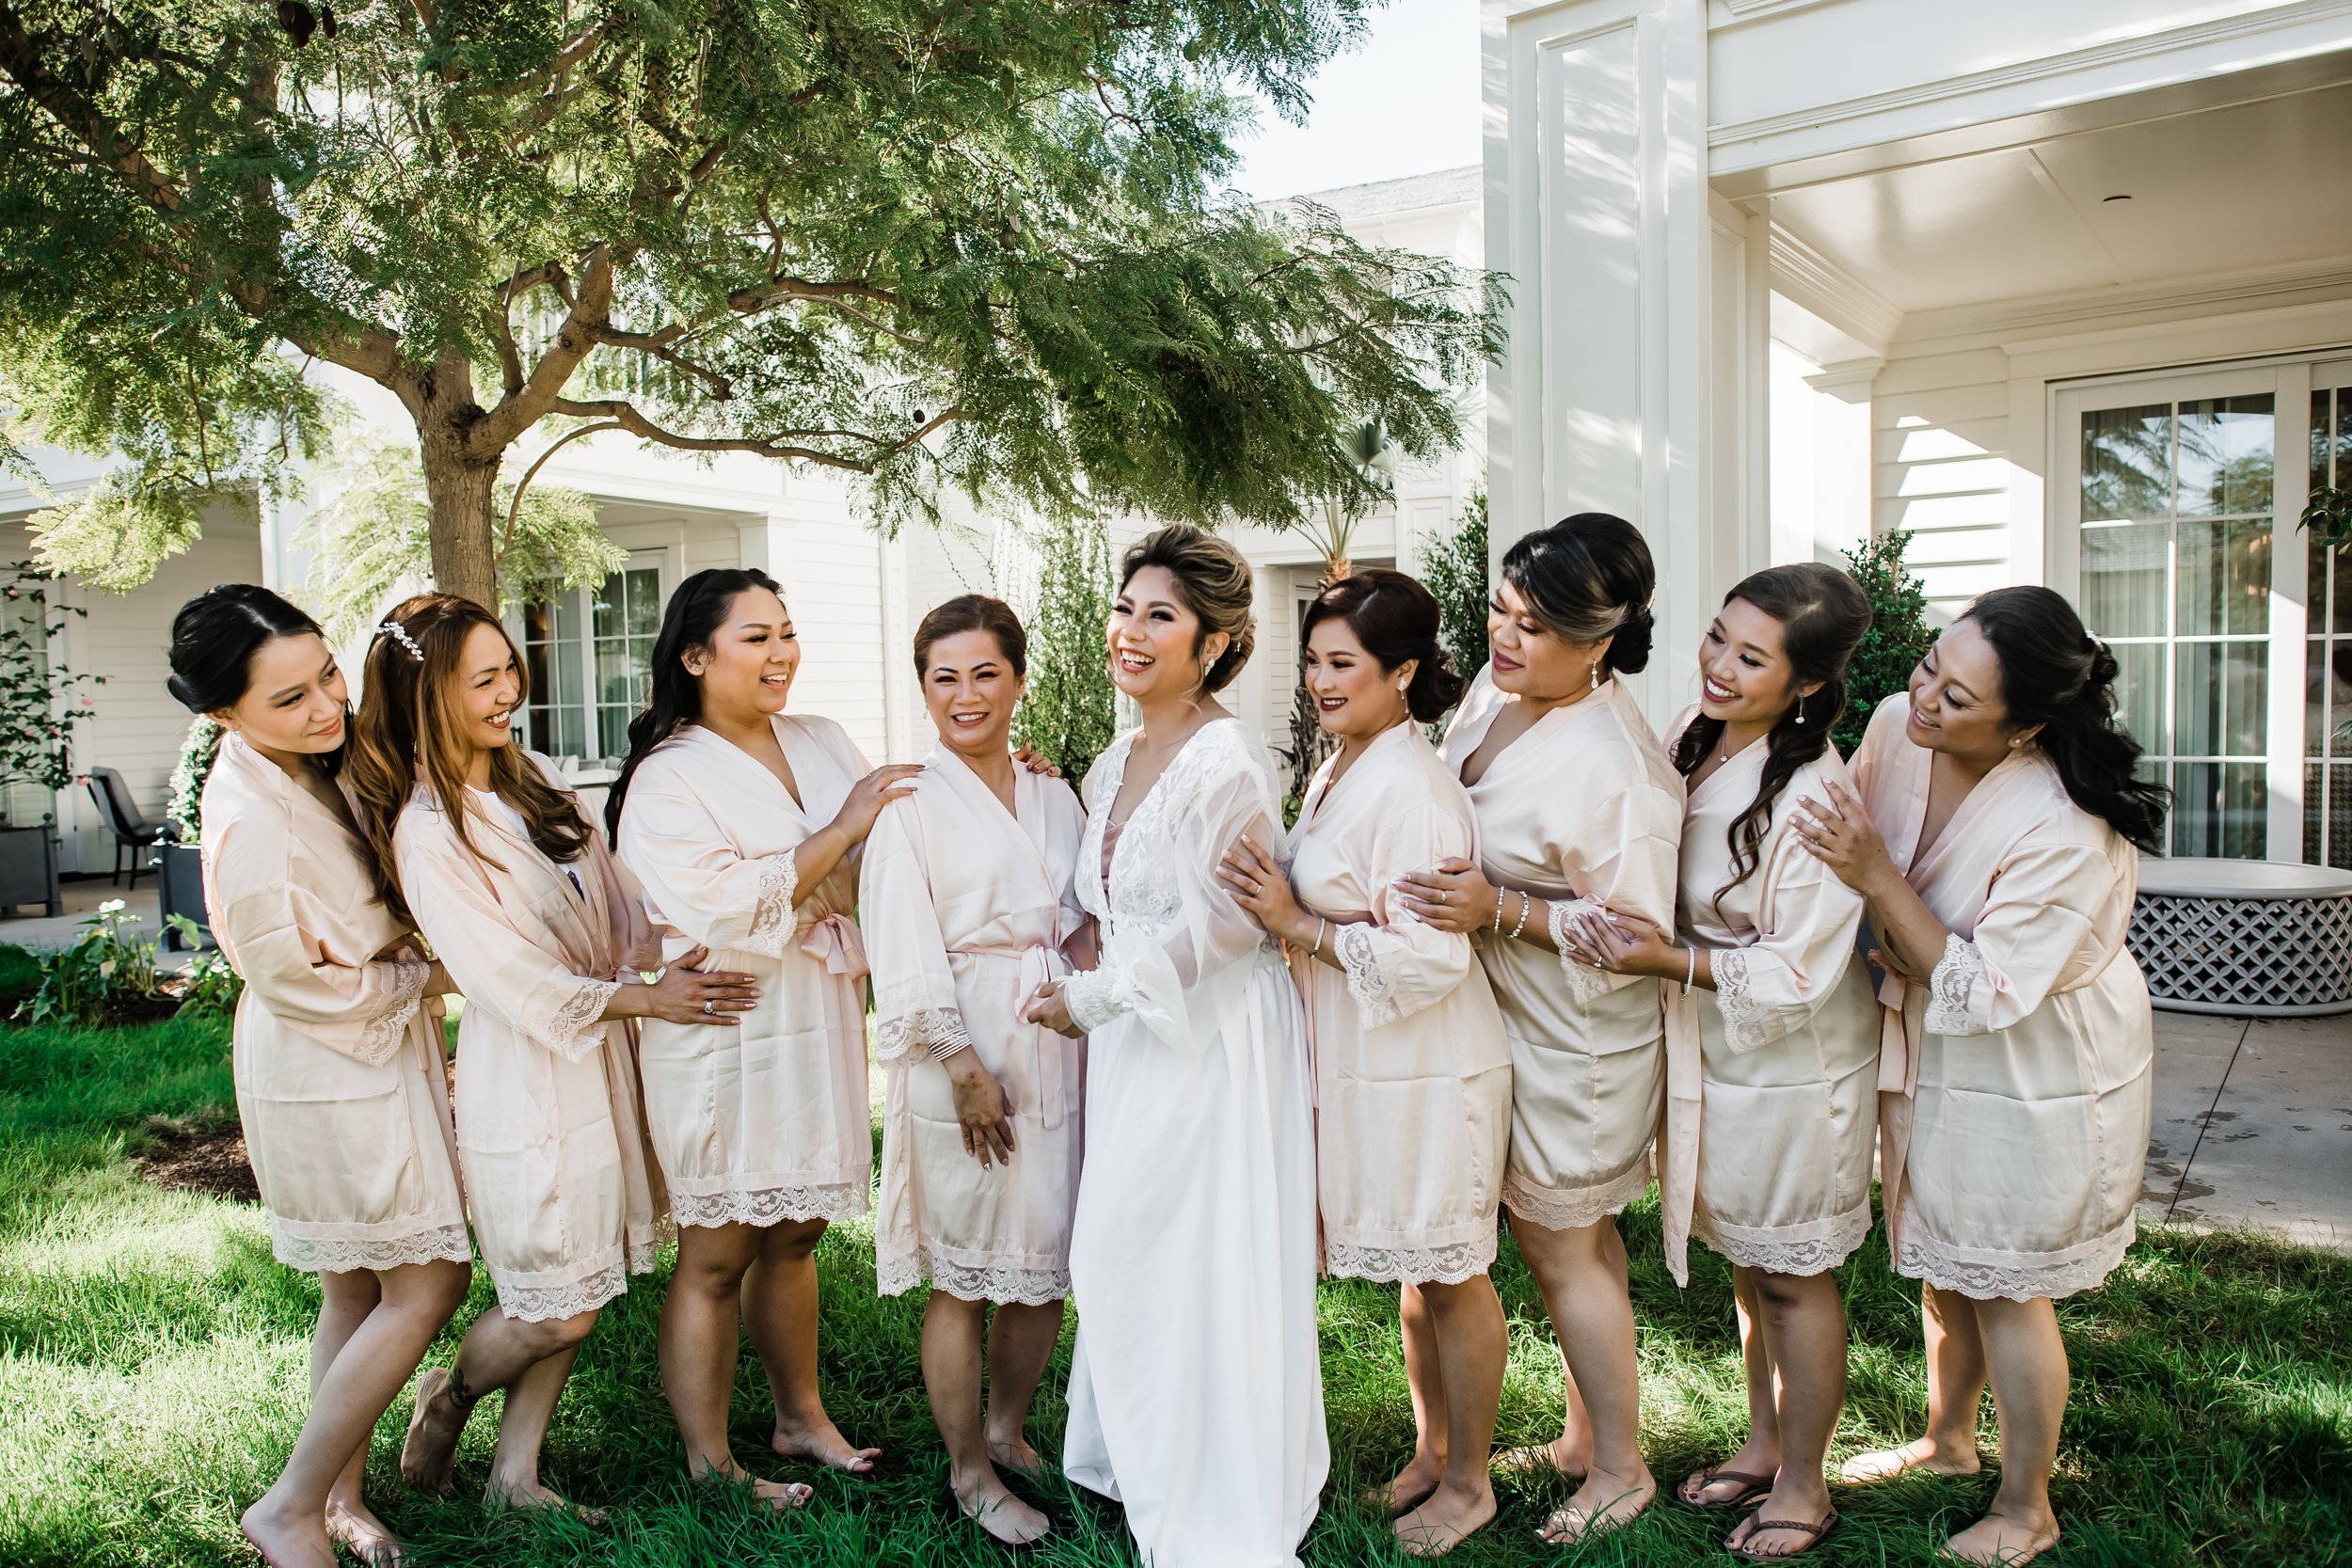 www.santabarbarawedding.com | Old Mission SB | Events by Maxi | Michelle Ramirez | Tangled Lotus | Bride and Bridesmaids in Robes Before Ceremony 